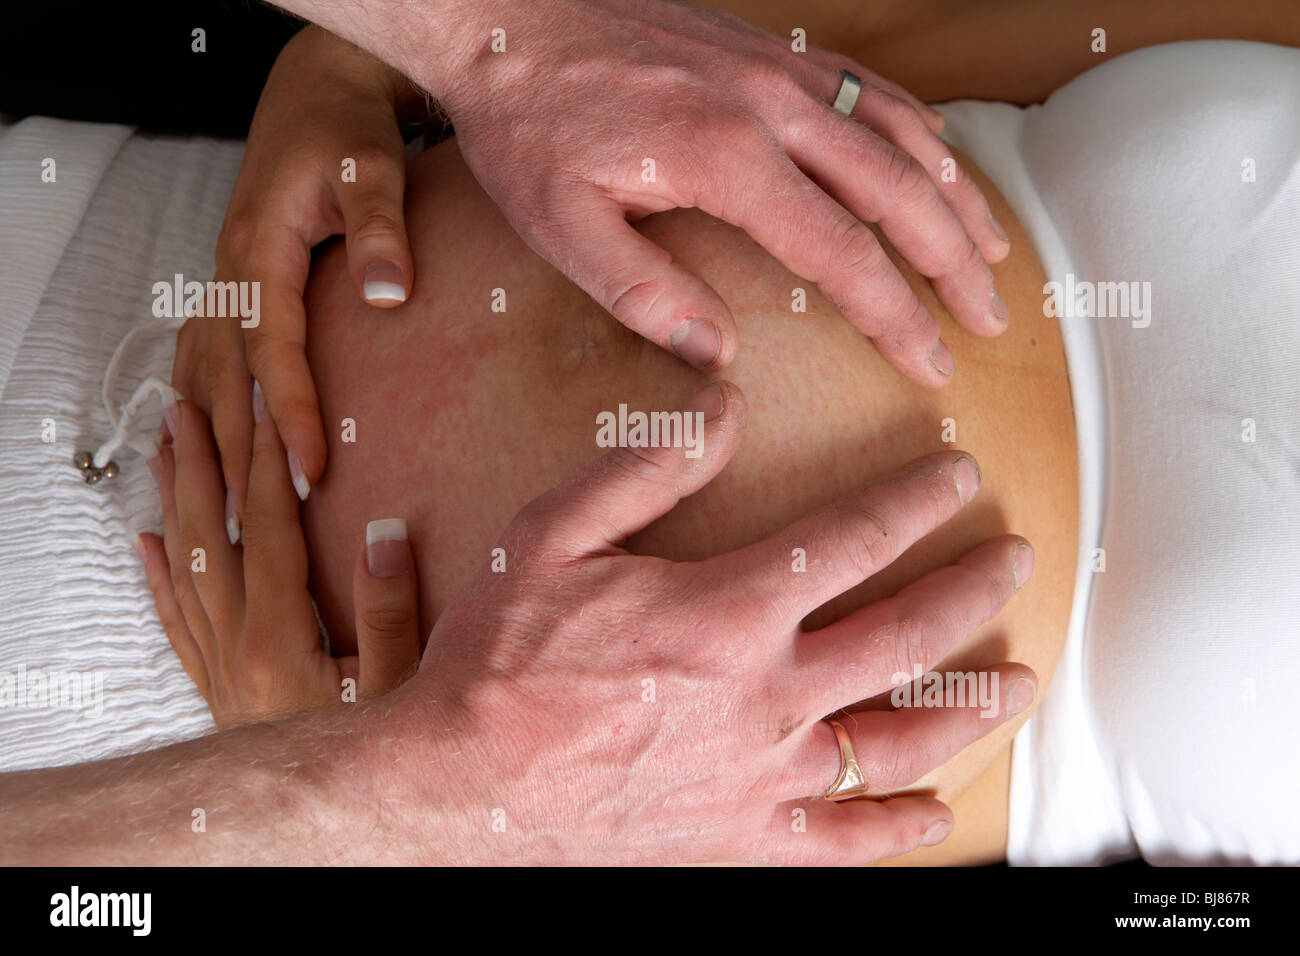 8 month pregnant 30 year old woman with 37 year old male partner hands on the bump Stock Photo